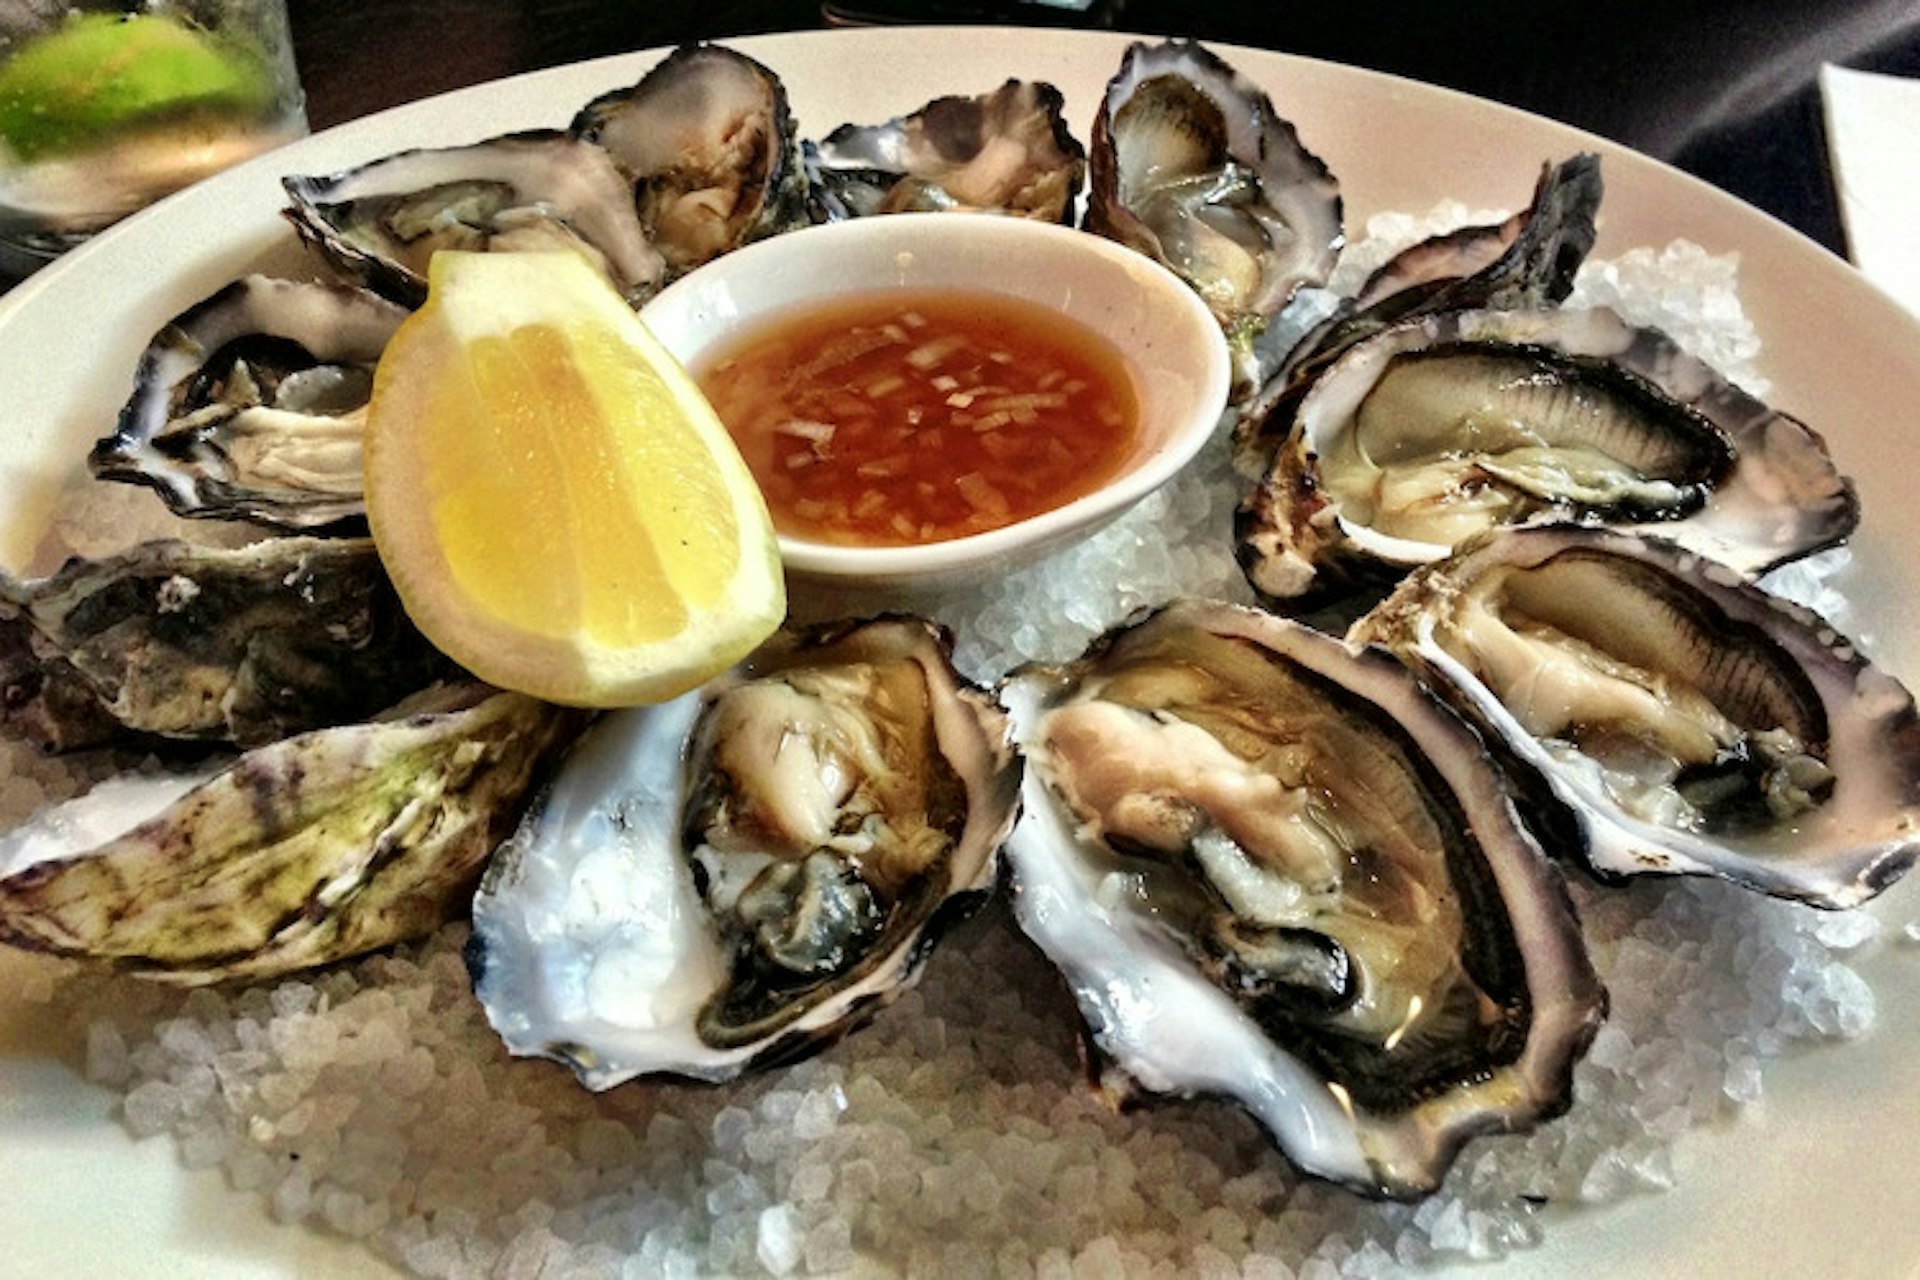 It's all about the oysters in Melbourne for this traveller.